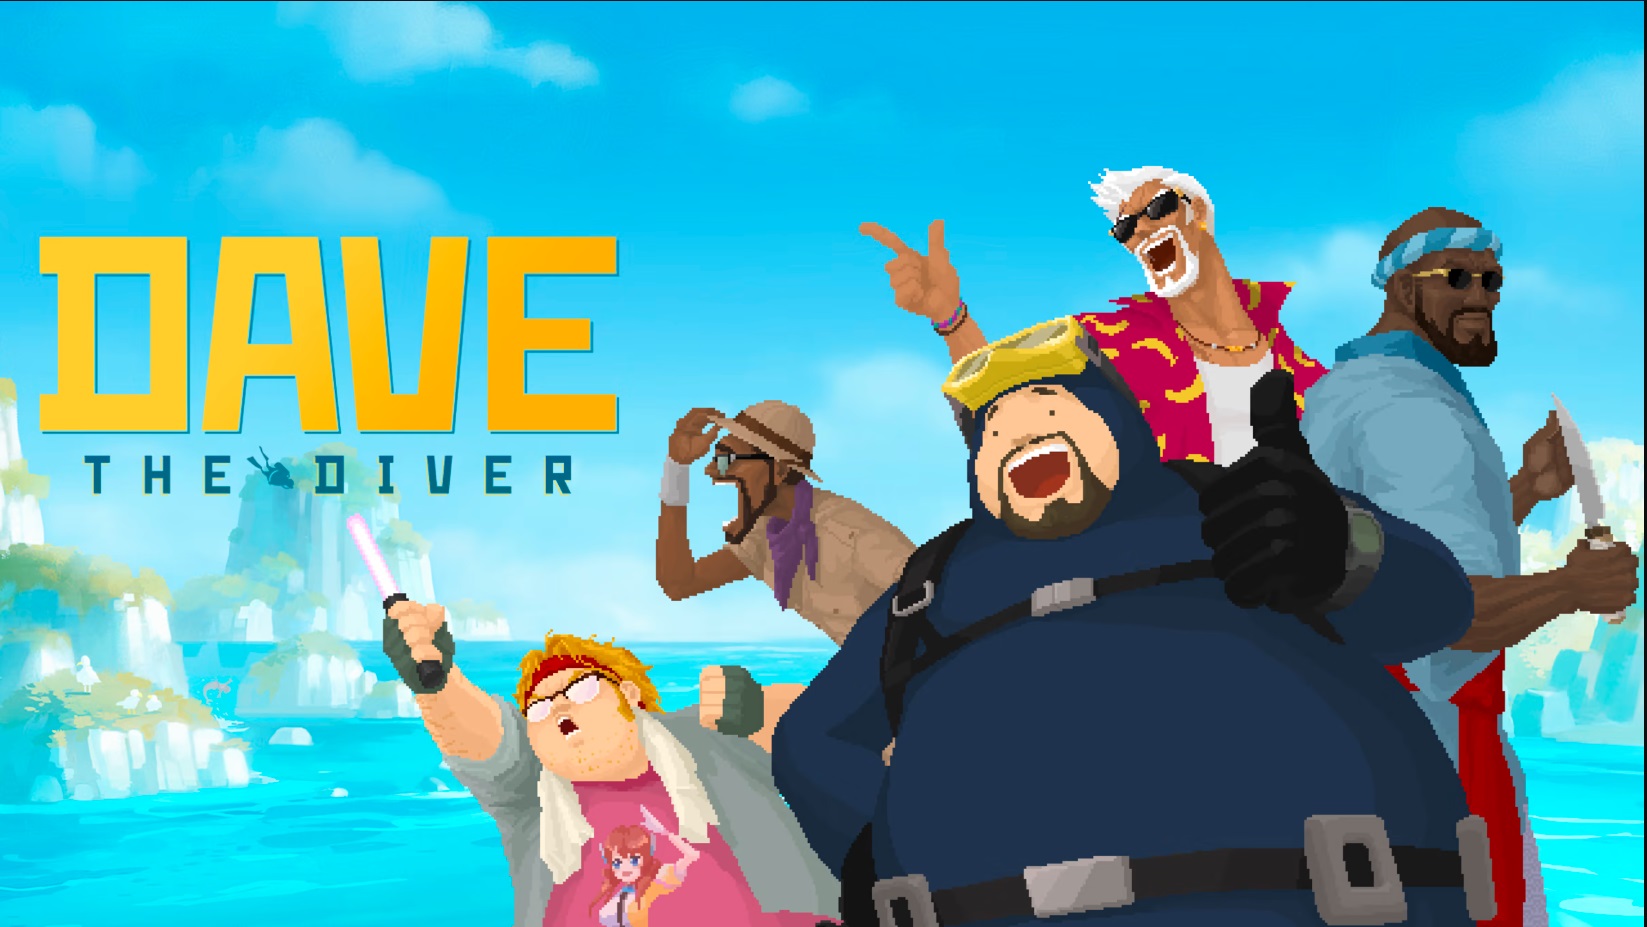 Would You Consider Dave The Diver An Indie Title